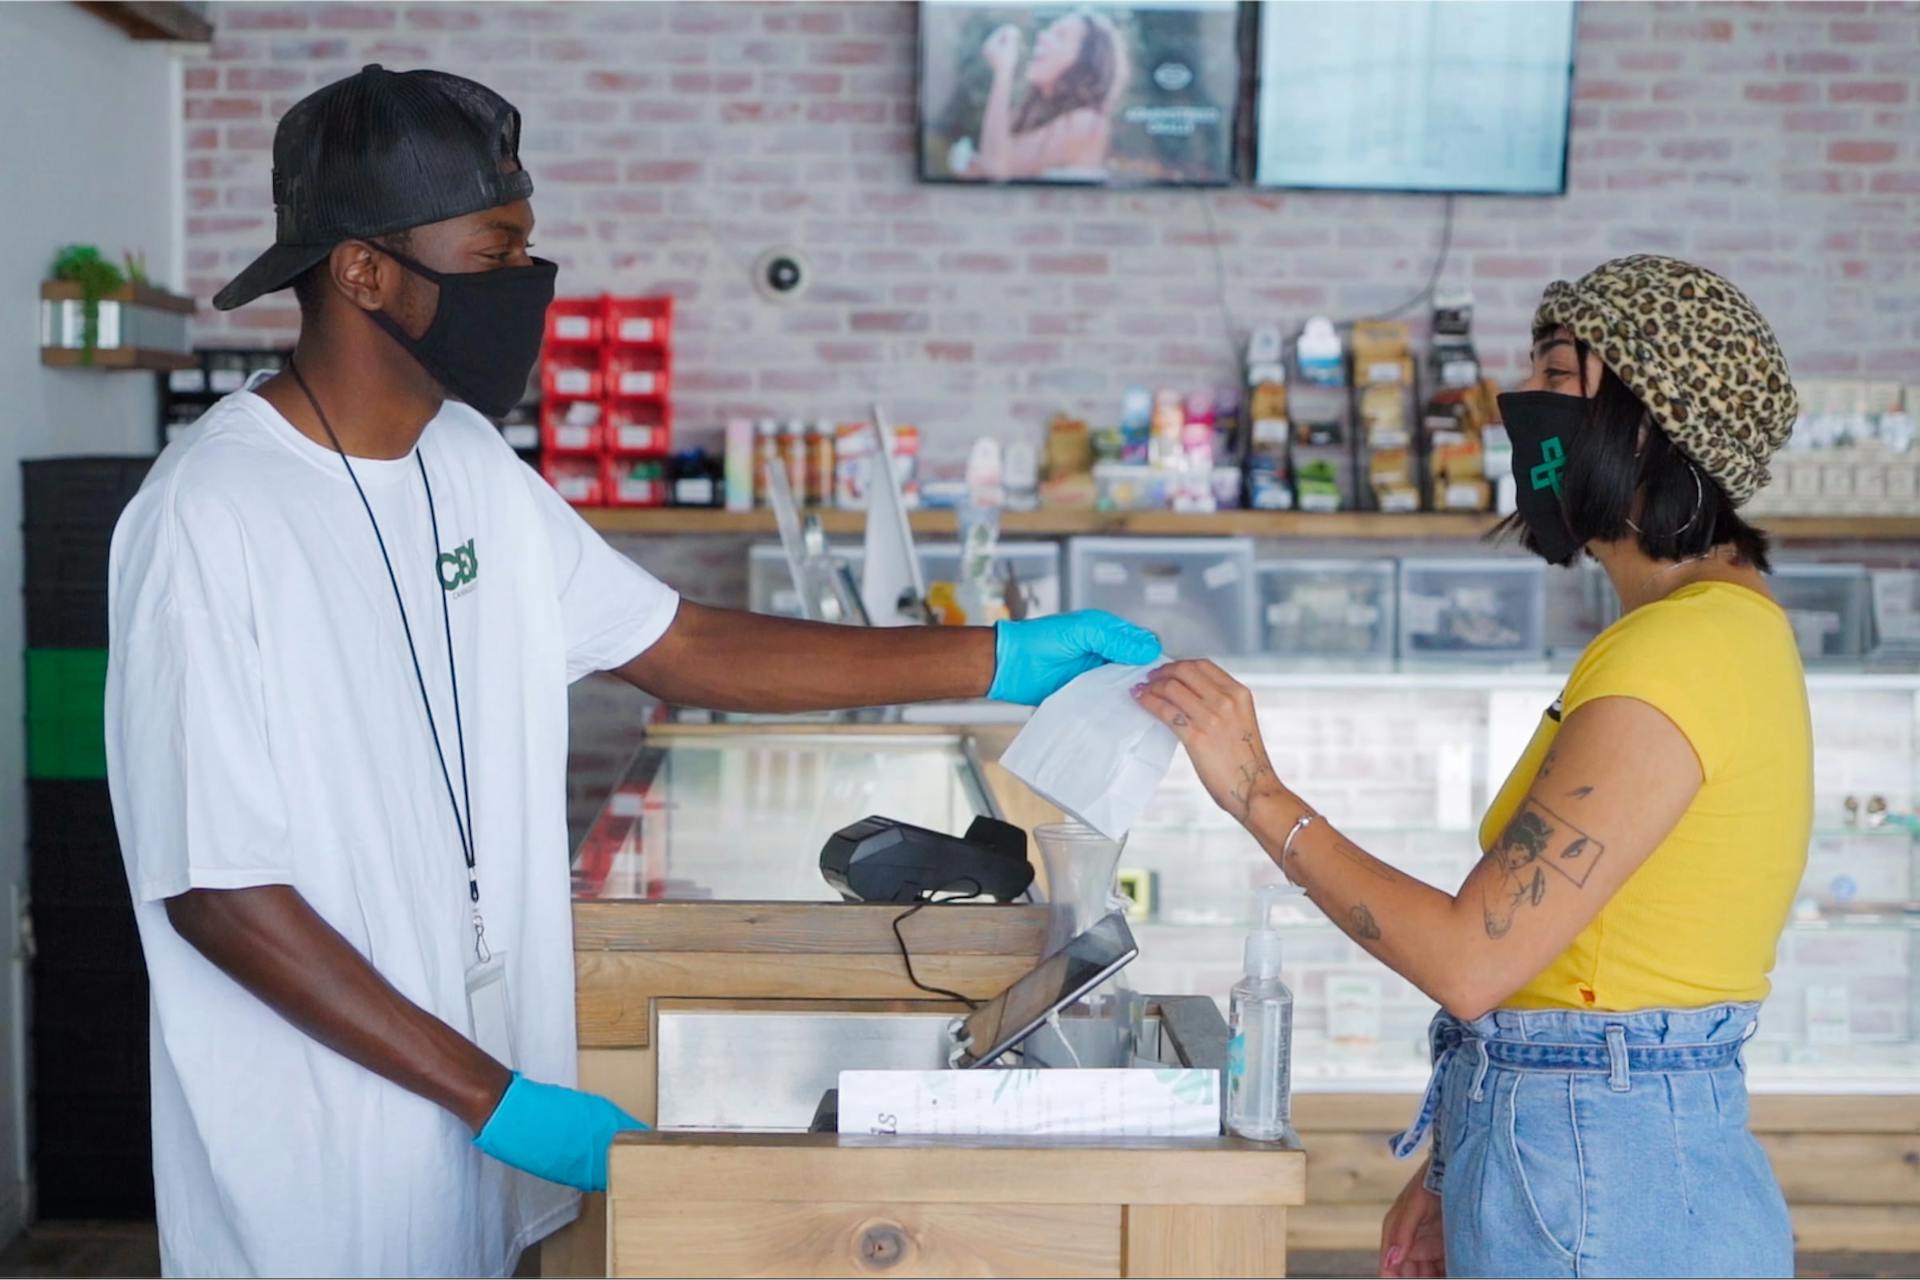 A budtender at The Green Cross hands off an order to a customer